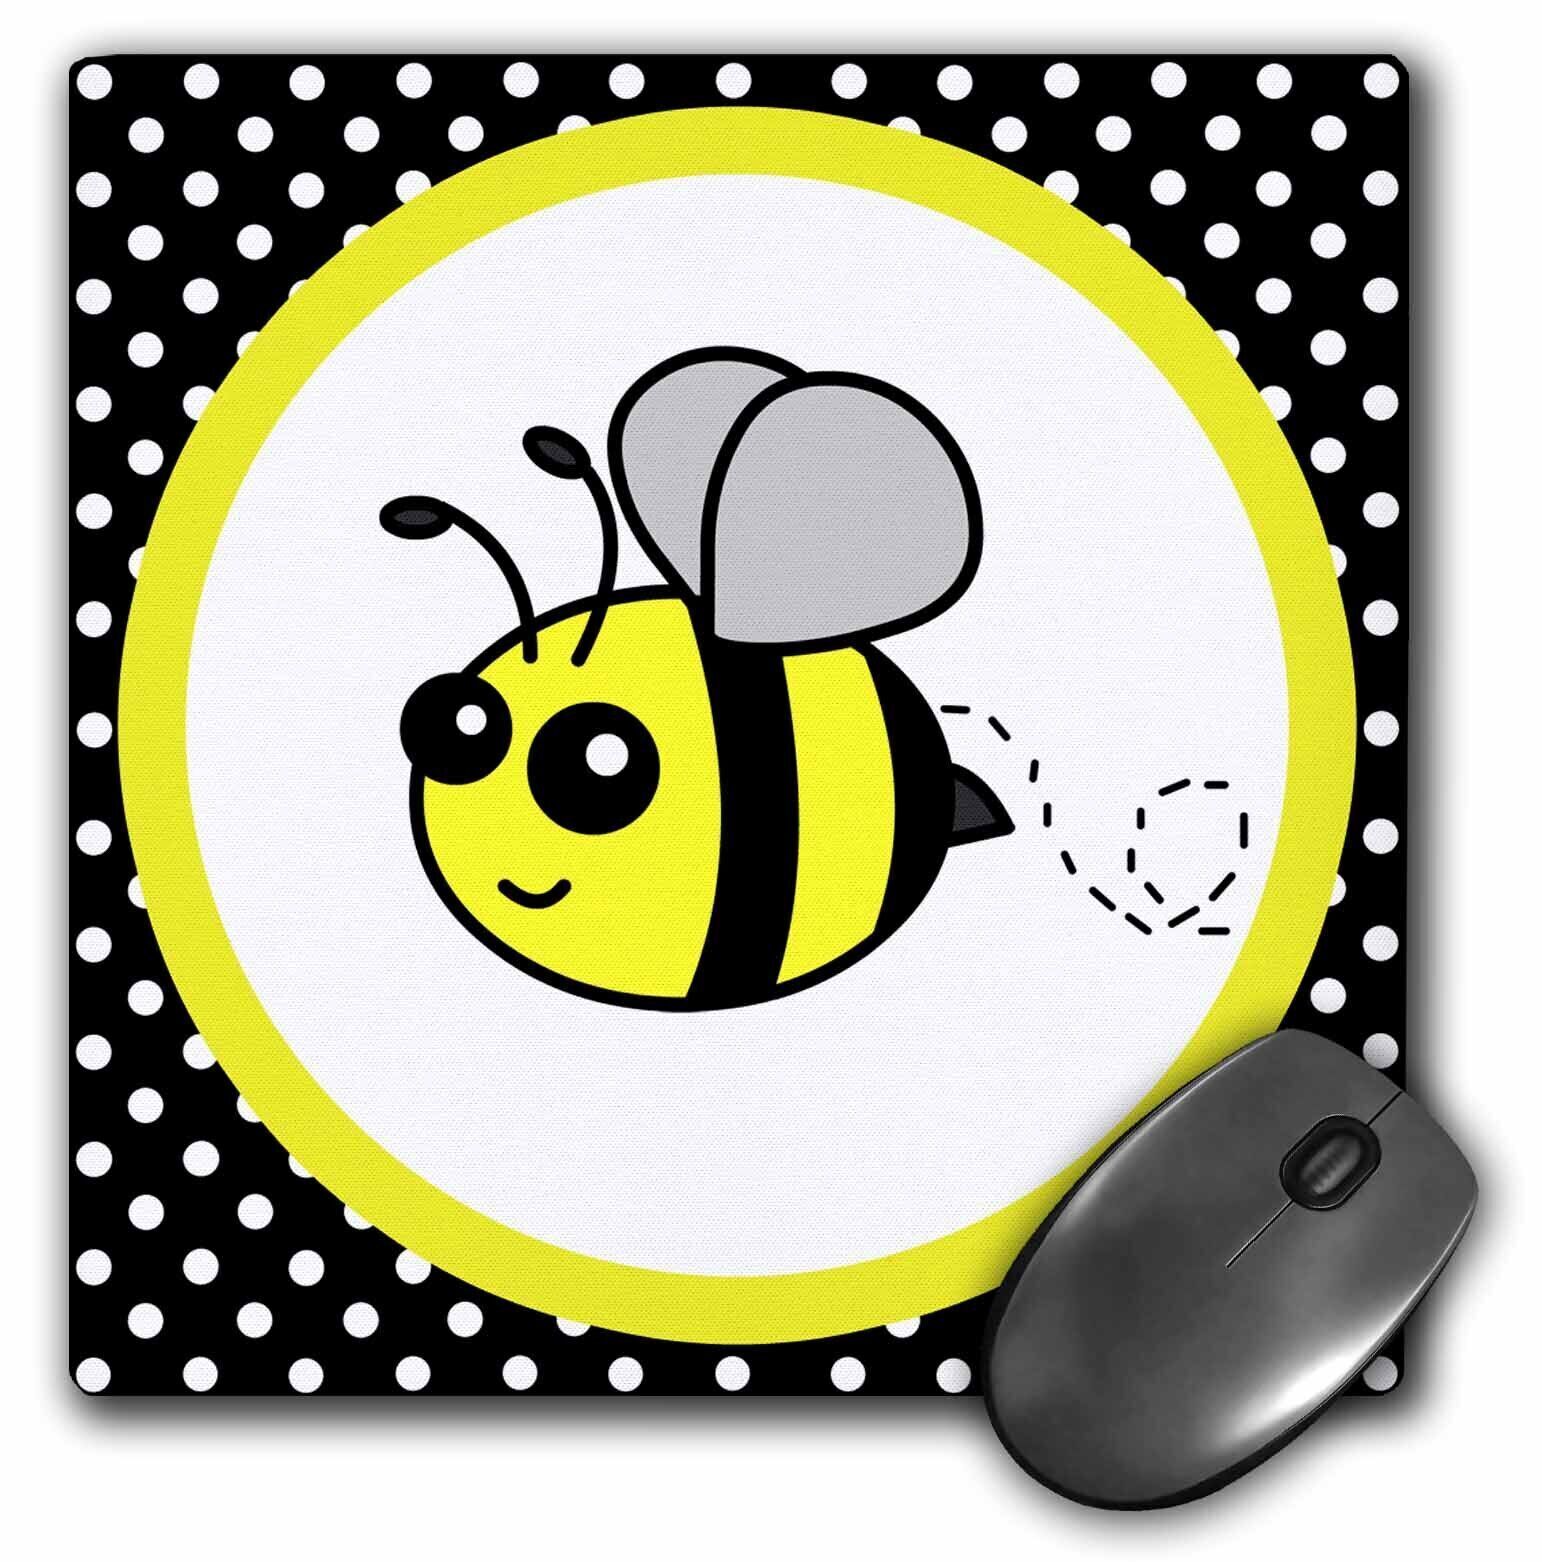 3dRose Cute Yellow Bumble Bee on Black and White Polka Dots  MousePad